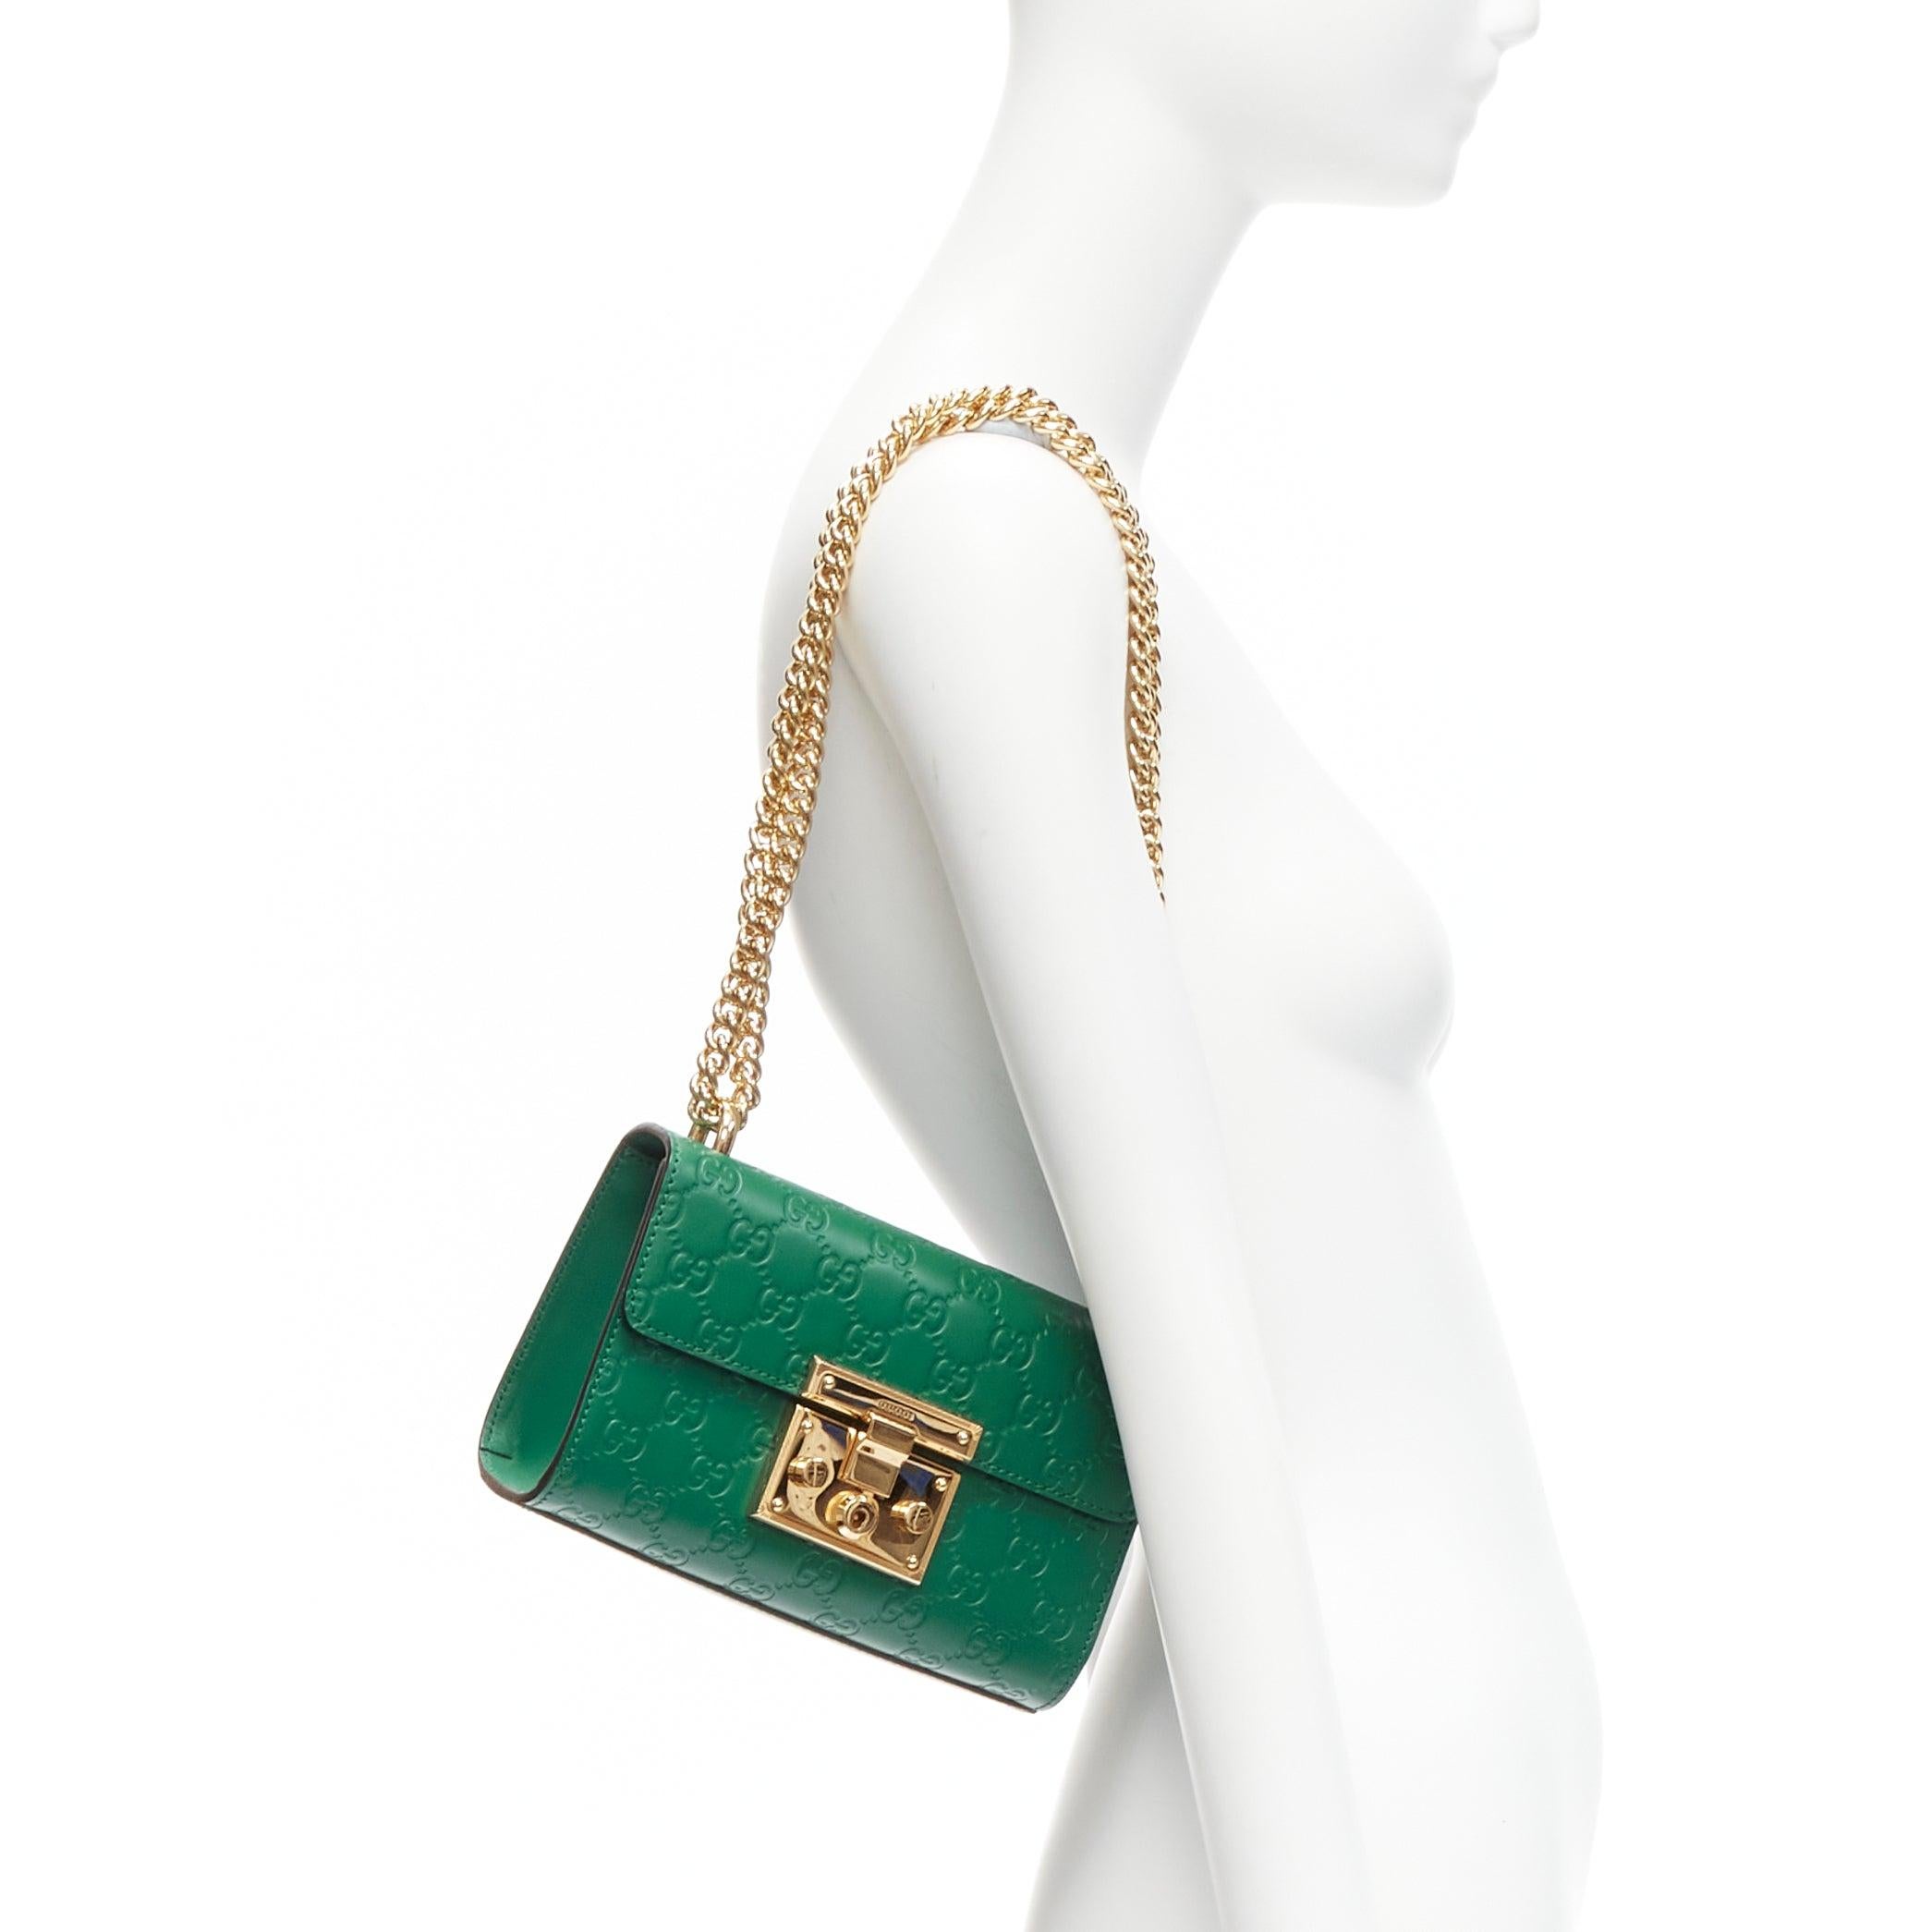 GUCCI Guccissima green leather gold padlock crossbody chain bag
Reference: CELE/A00014
Brand: Gucci
Collection: Guccissima
Material: Leather
Color: Green
Pattern: Monogram
Closure: Buckle
Lining: Beige Leather
Extra Details: Guccissima Small Padlock